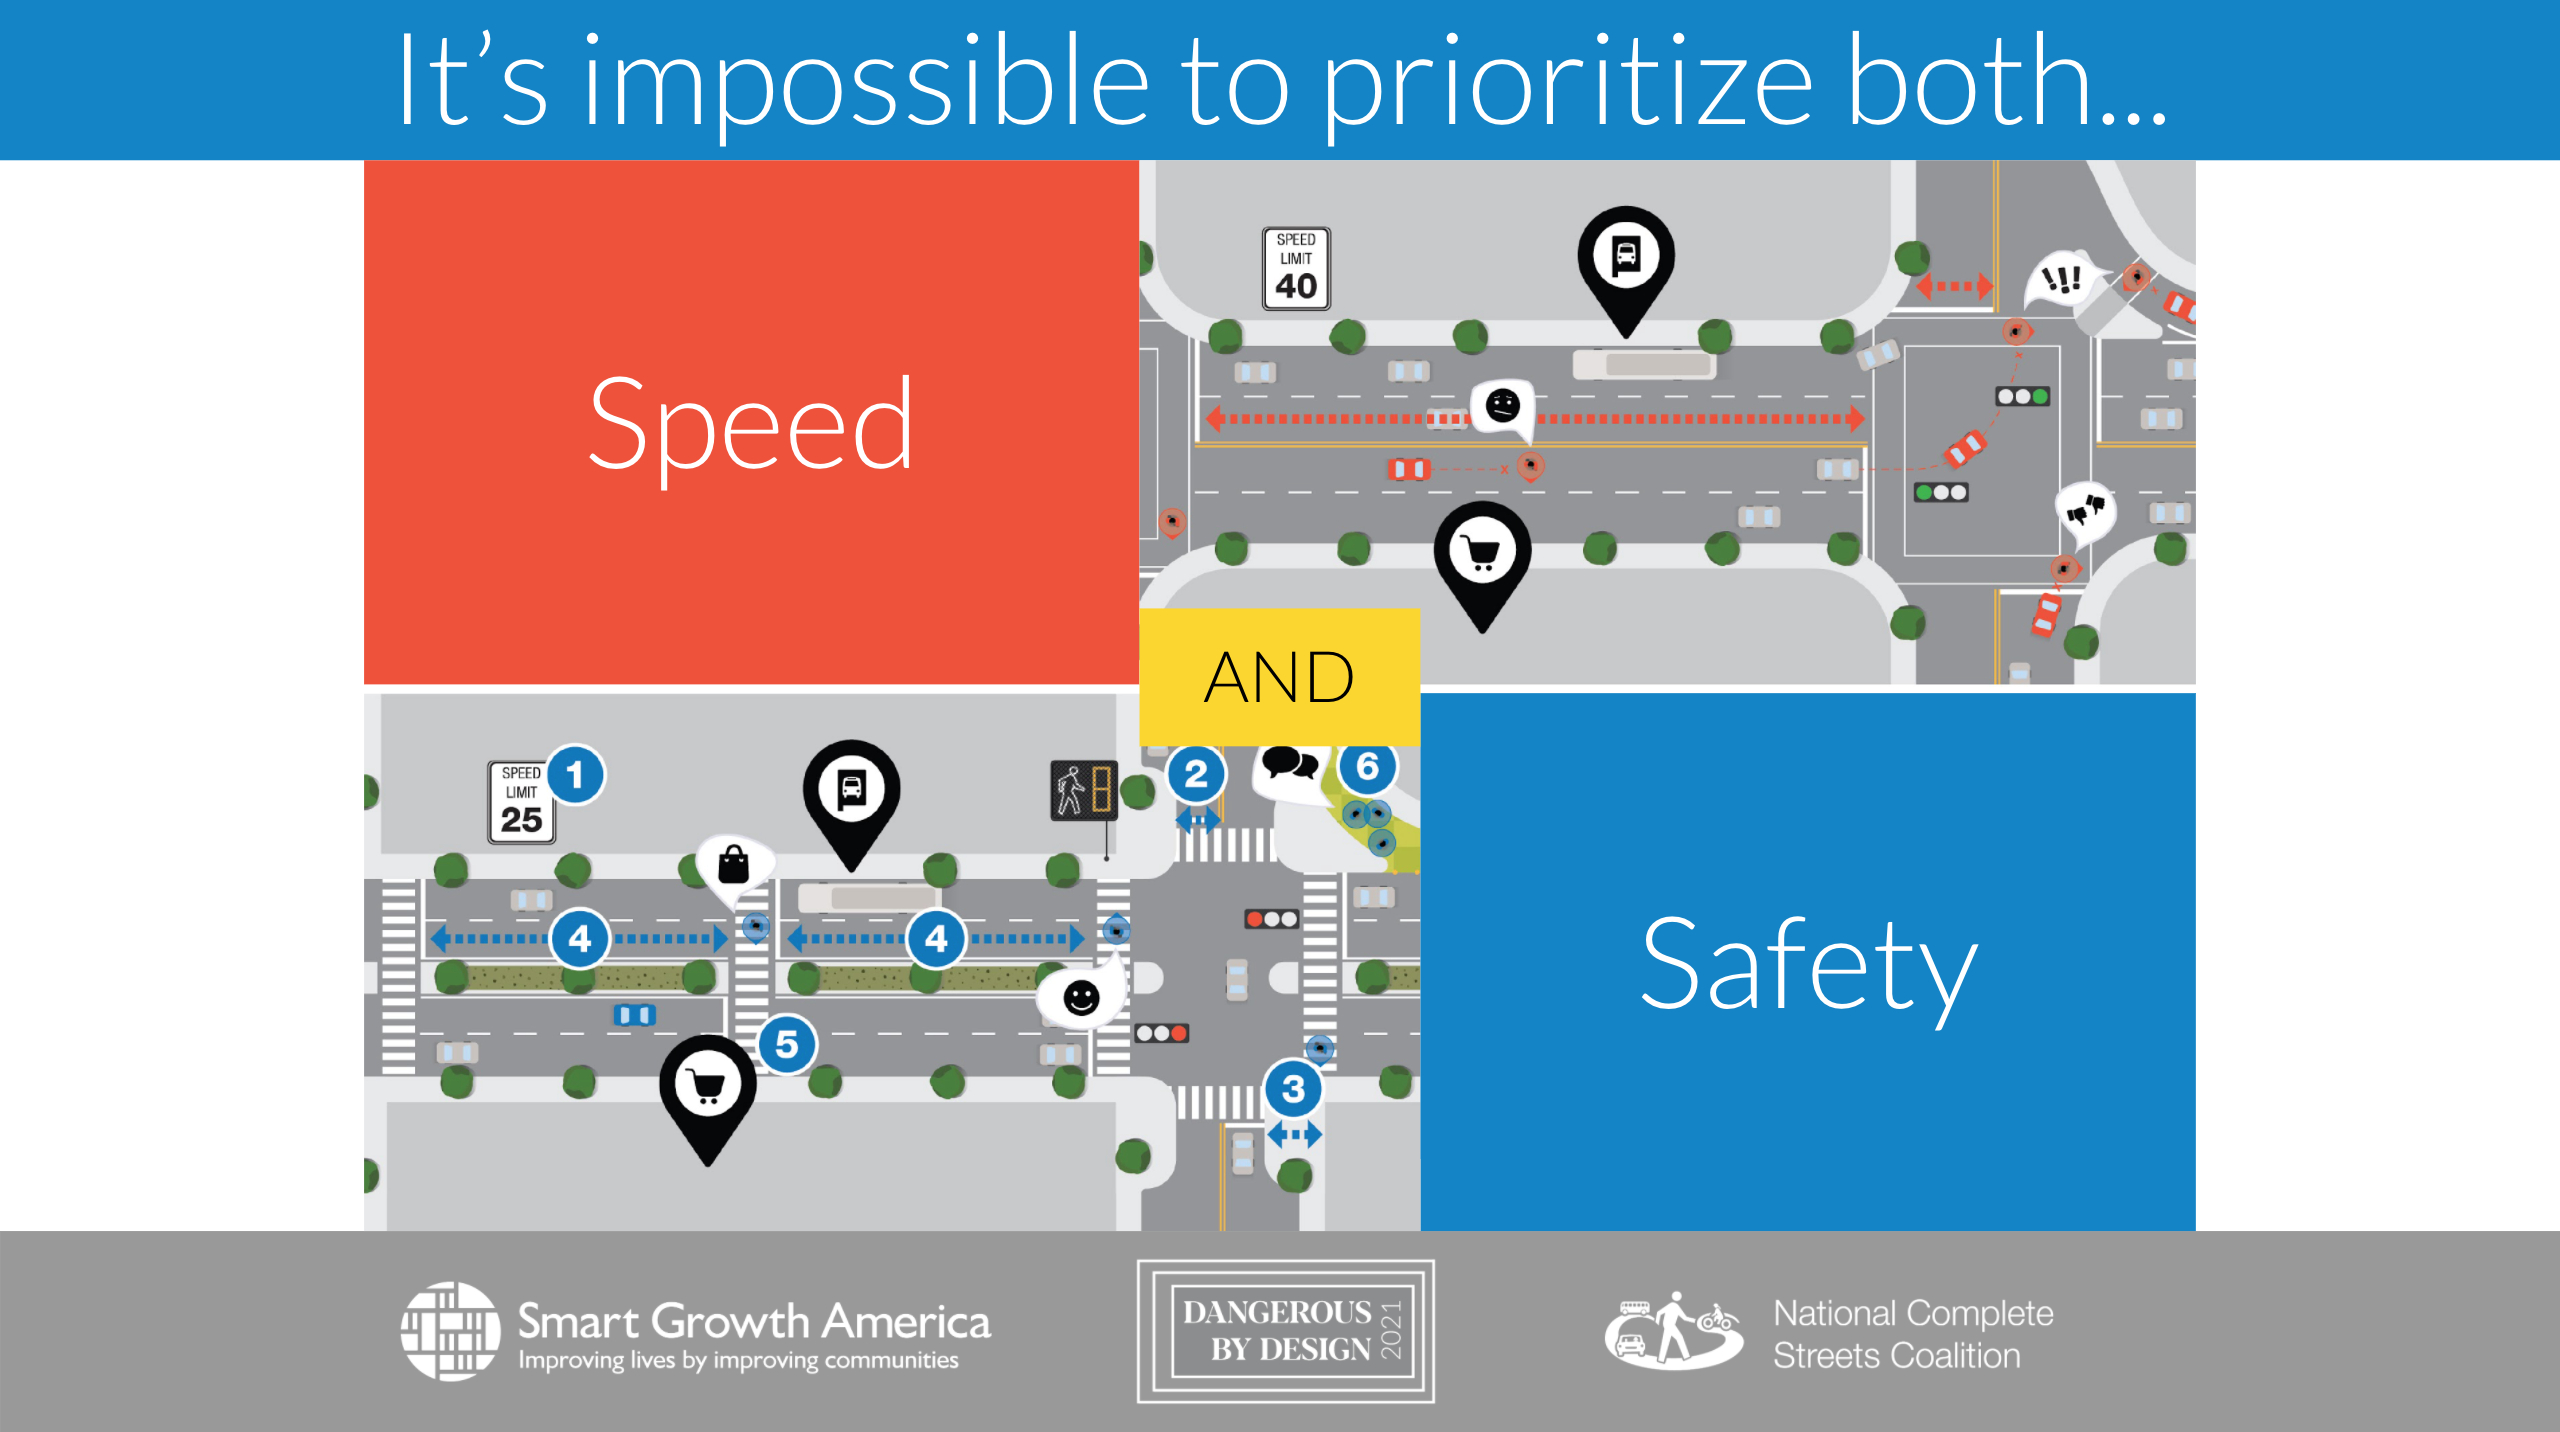 Why safety and speed are fundamentally incompatible—a visual guide